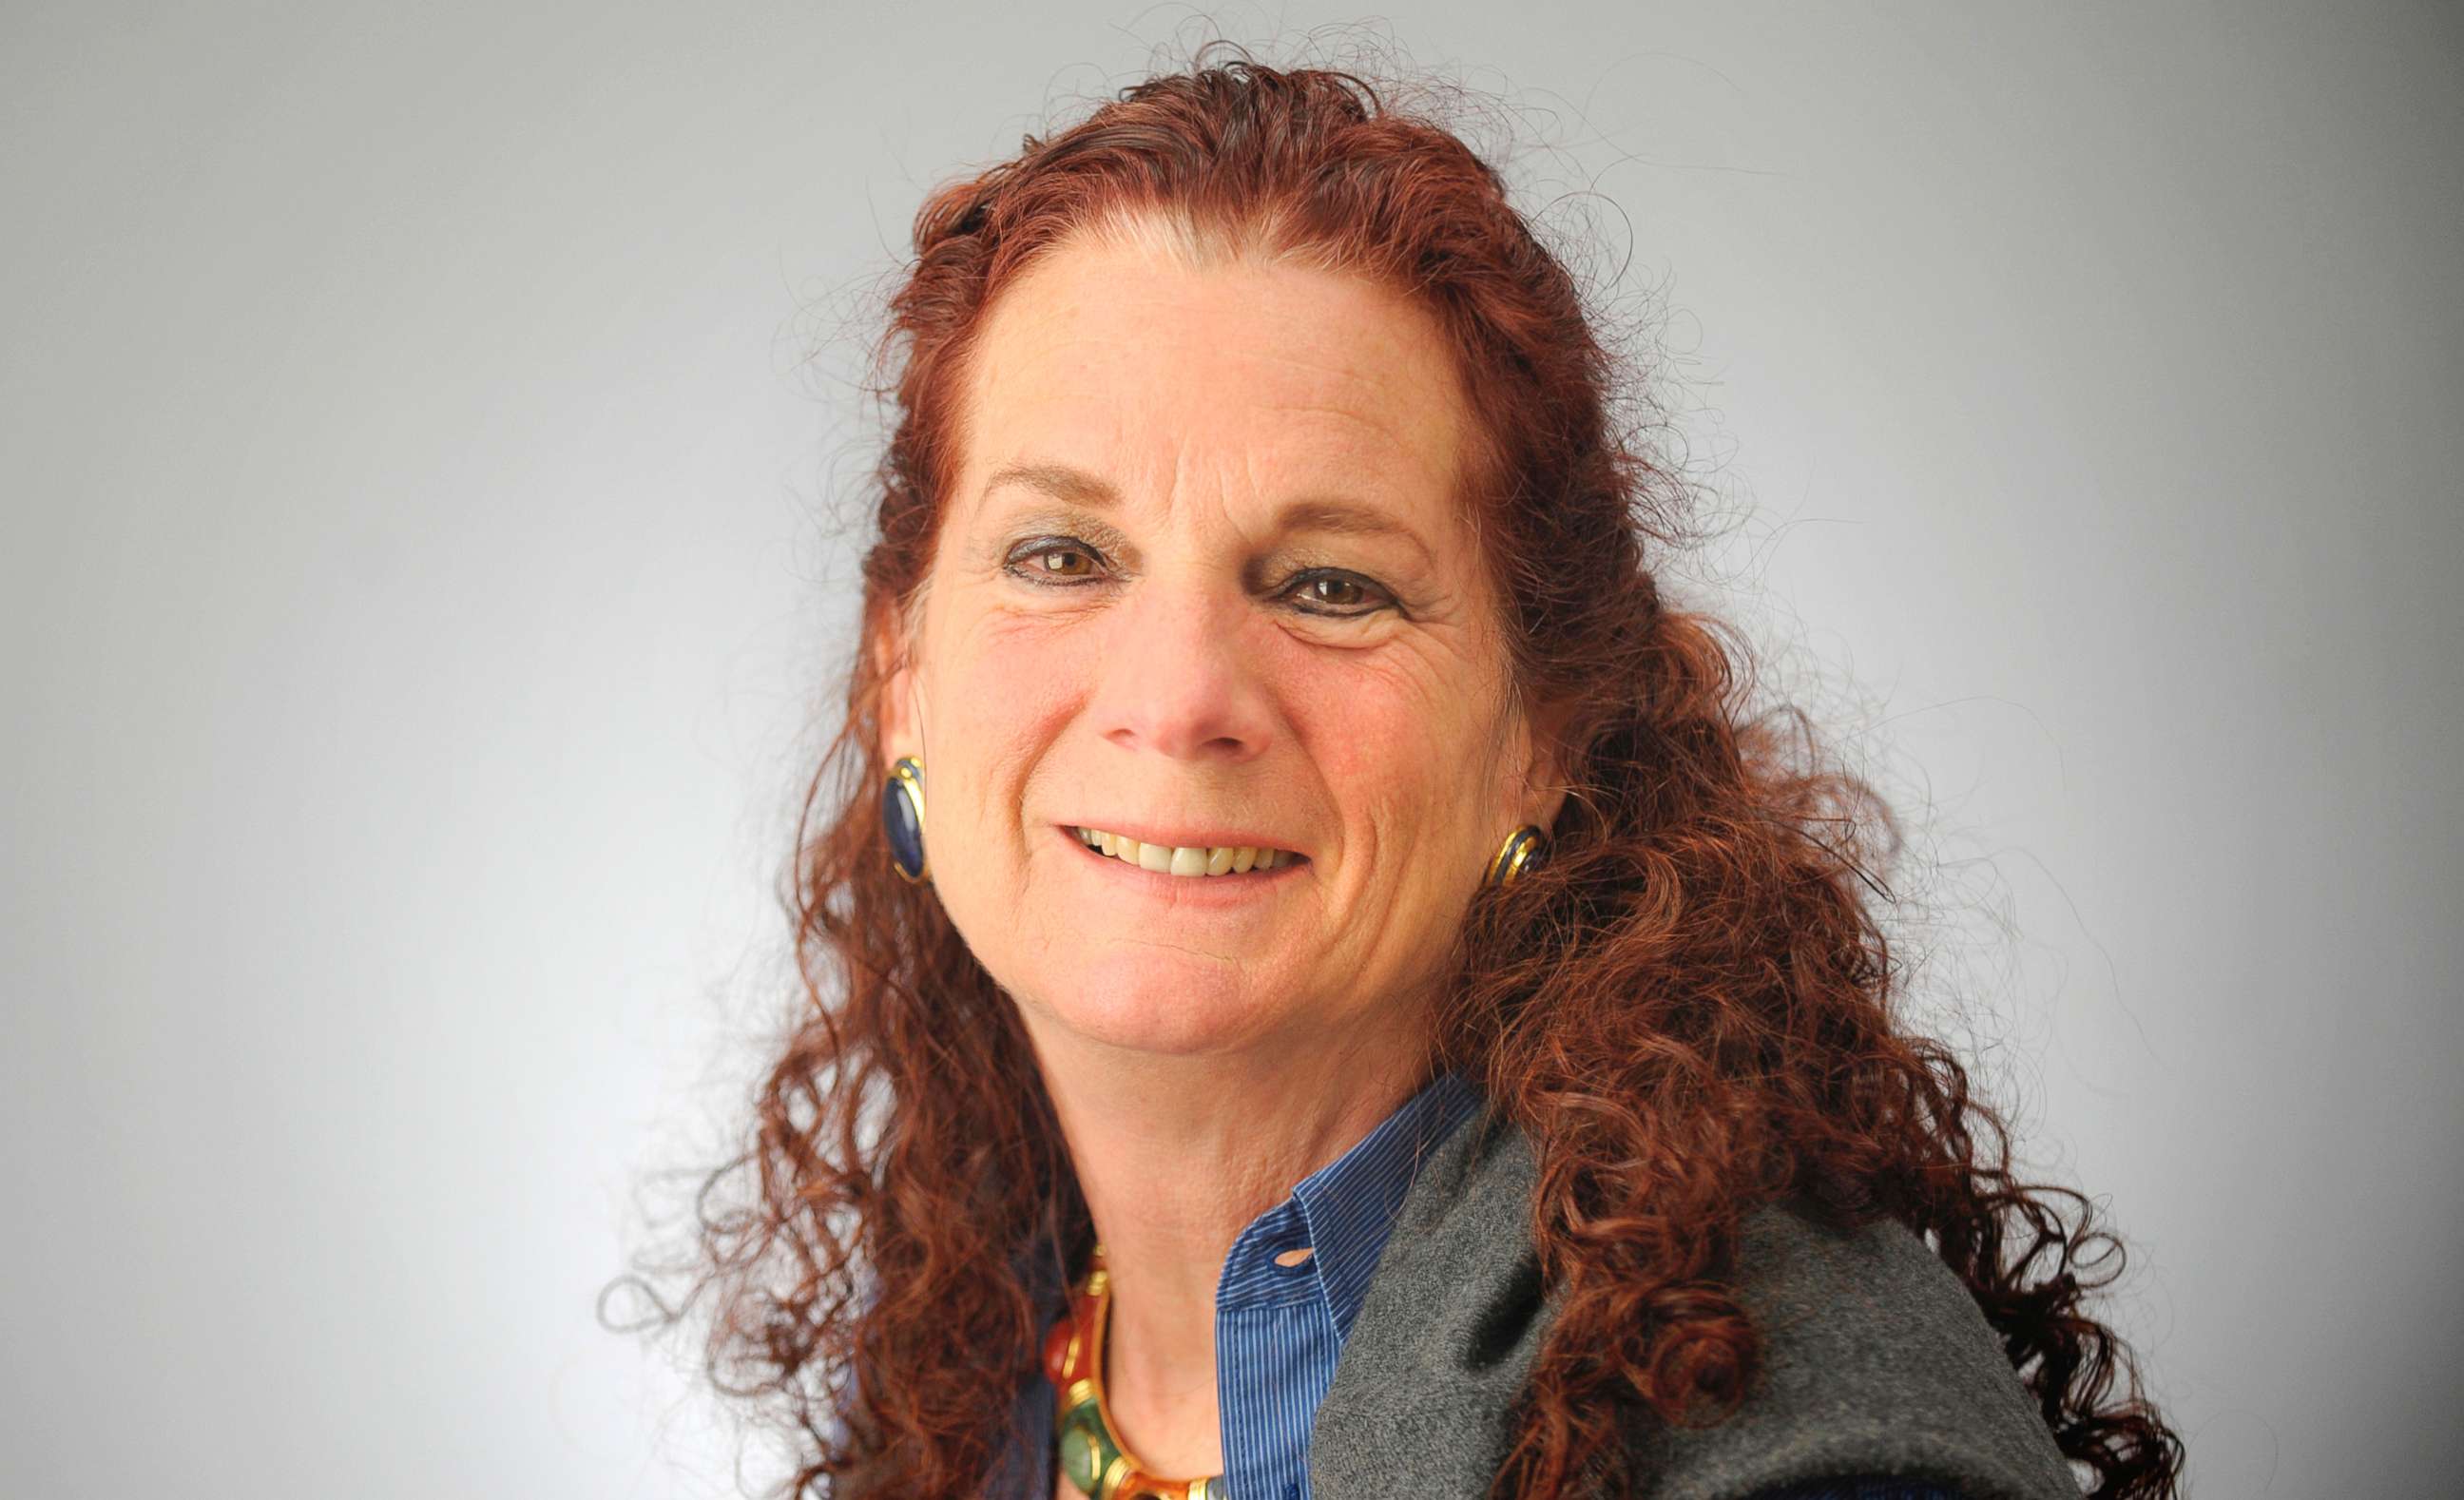 PHOTO: This undated photo shows Wendi Winters, reporter for the Capital Gazette. Winters was one of the victims when an active shooter targeted the newsroom, June 28, 2018, in Annapolis, Md.